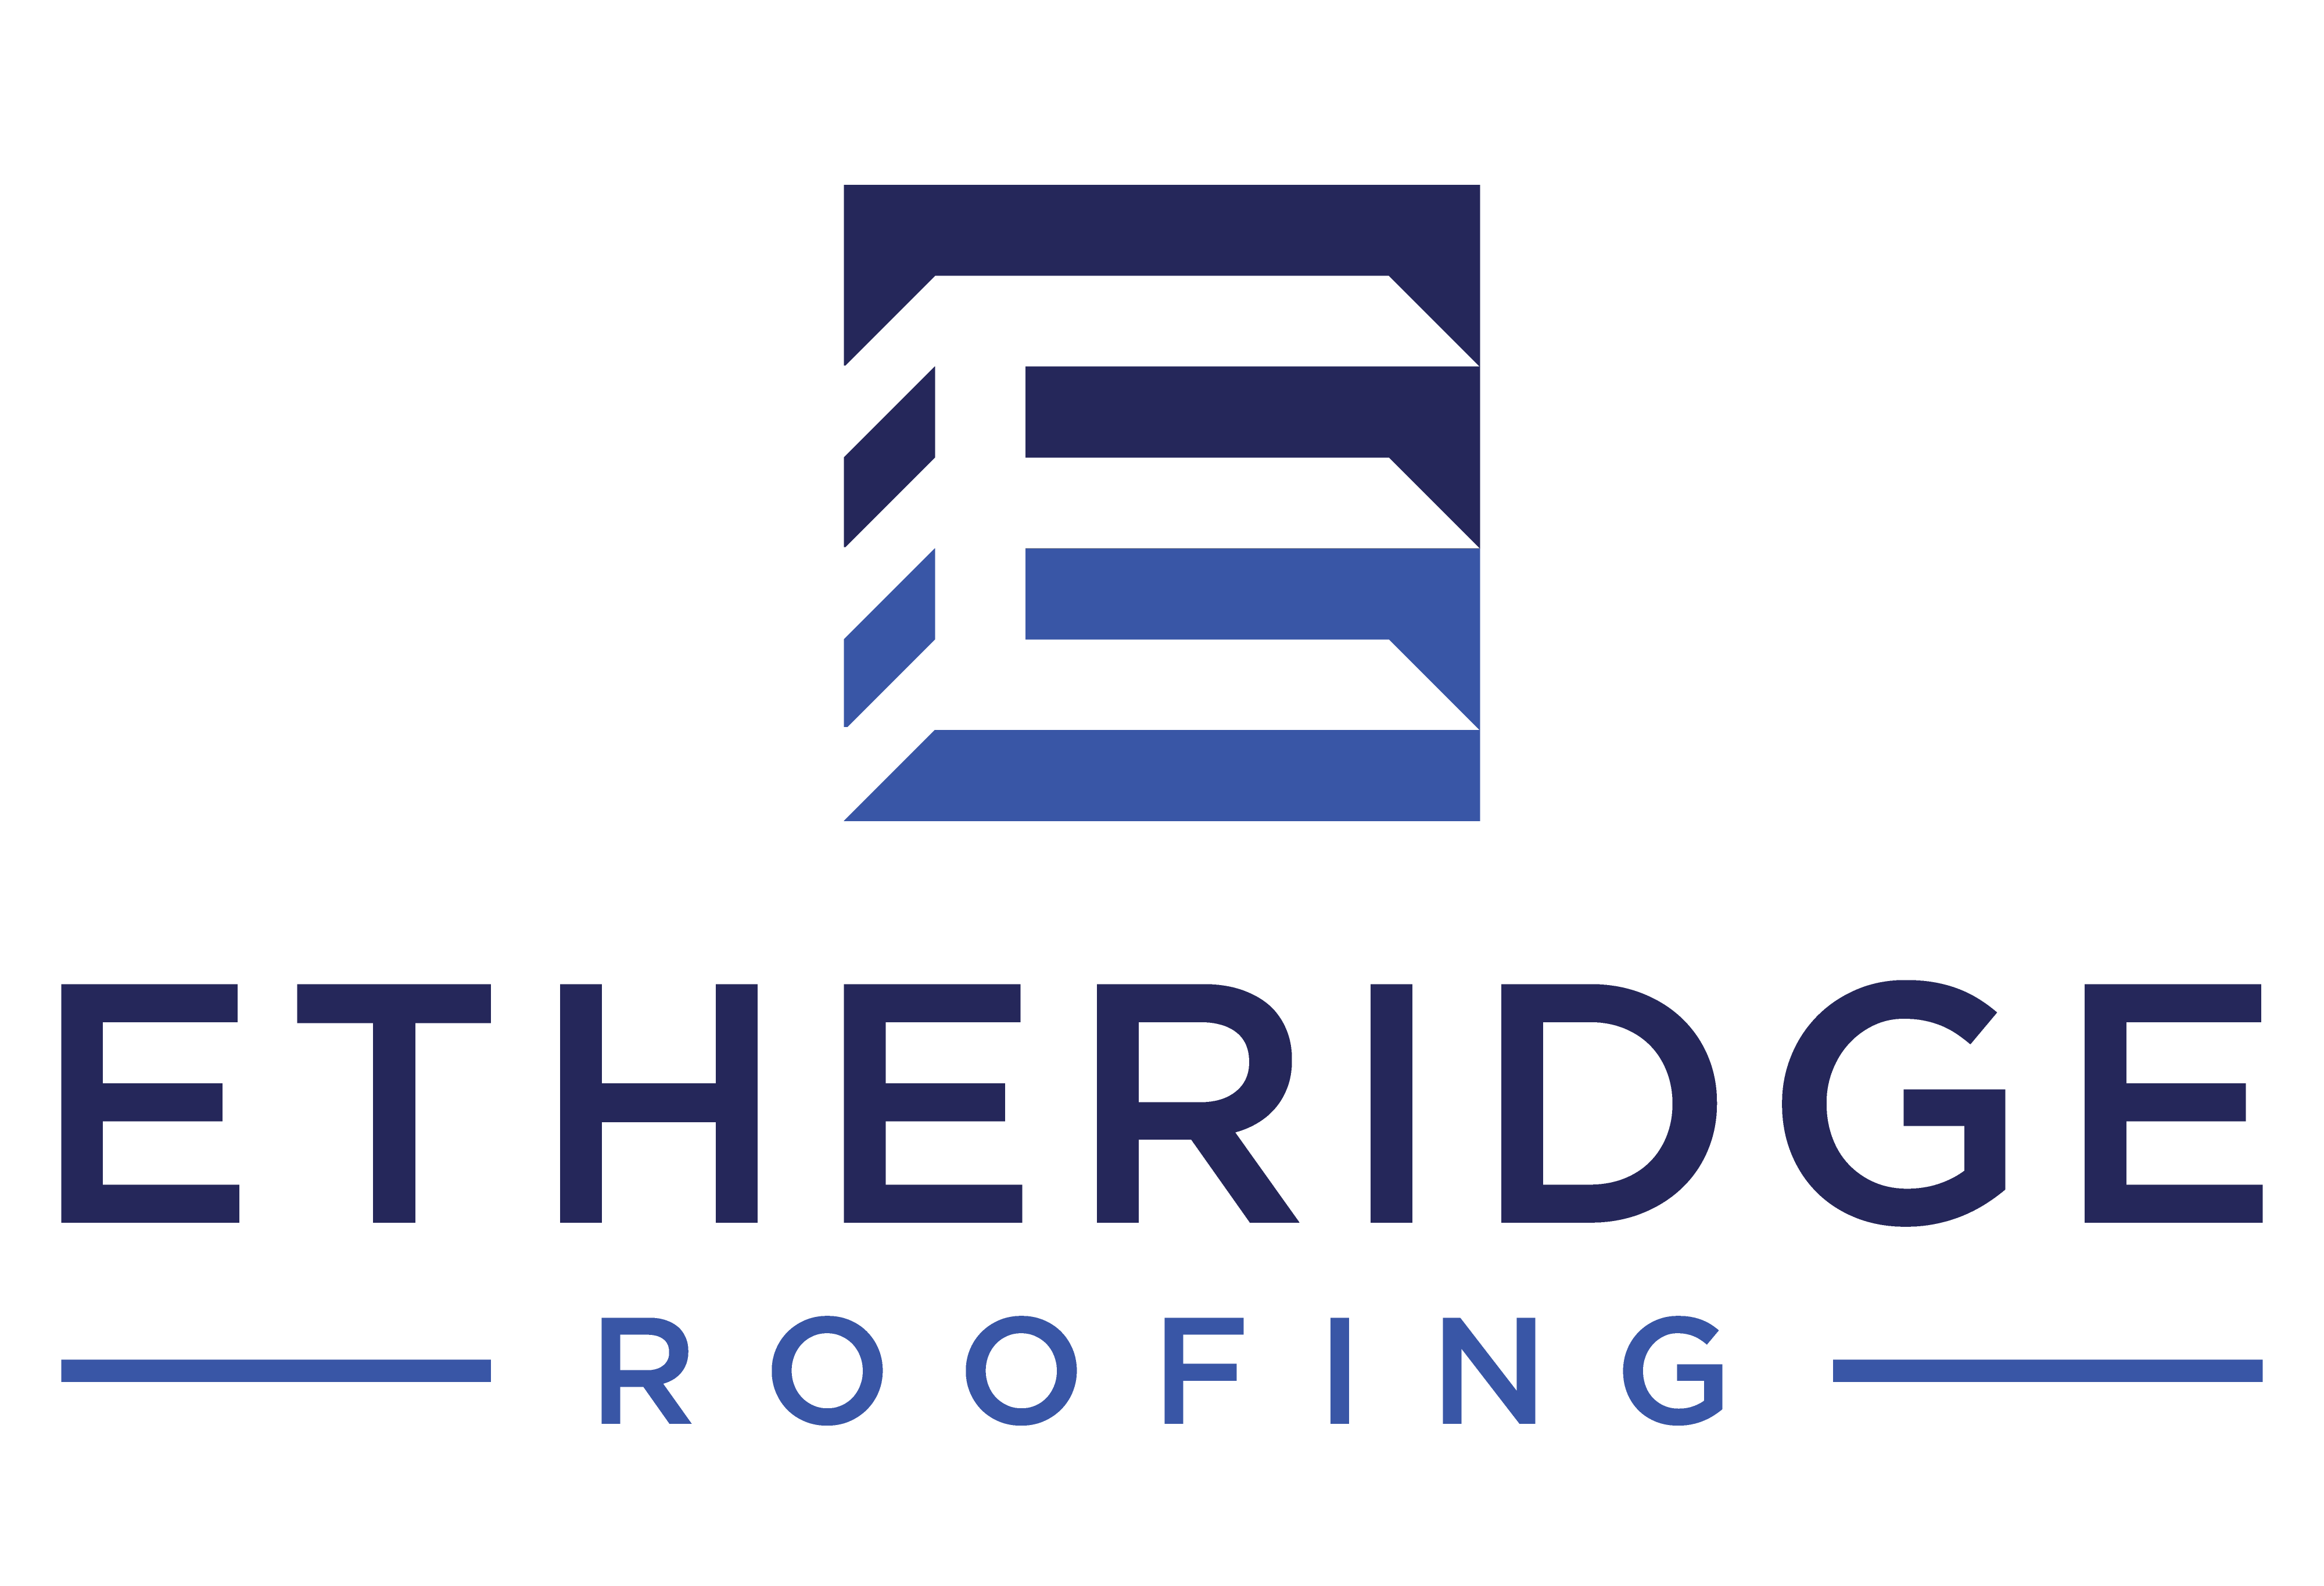 Etheridge Roofing roofing company in North Carolina